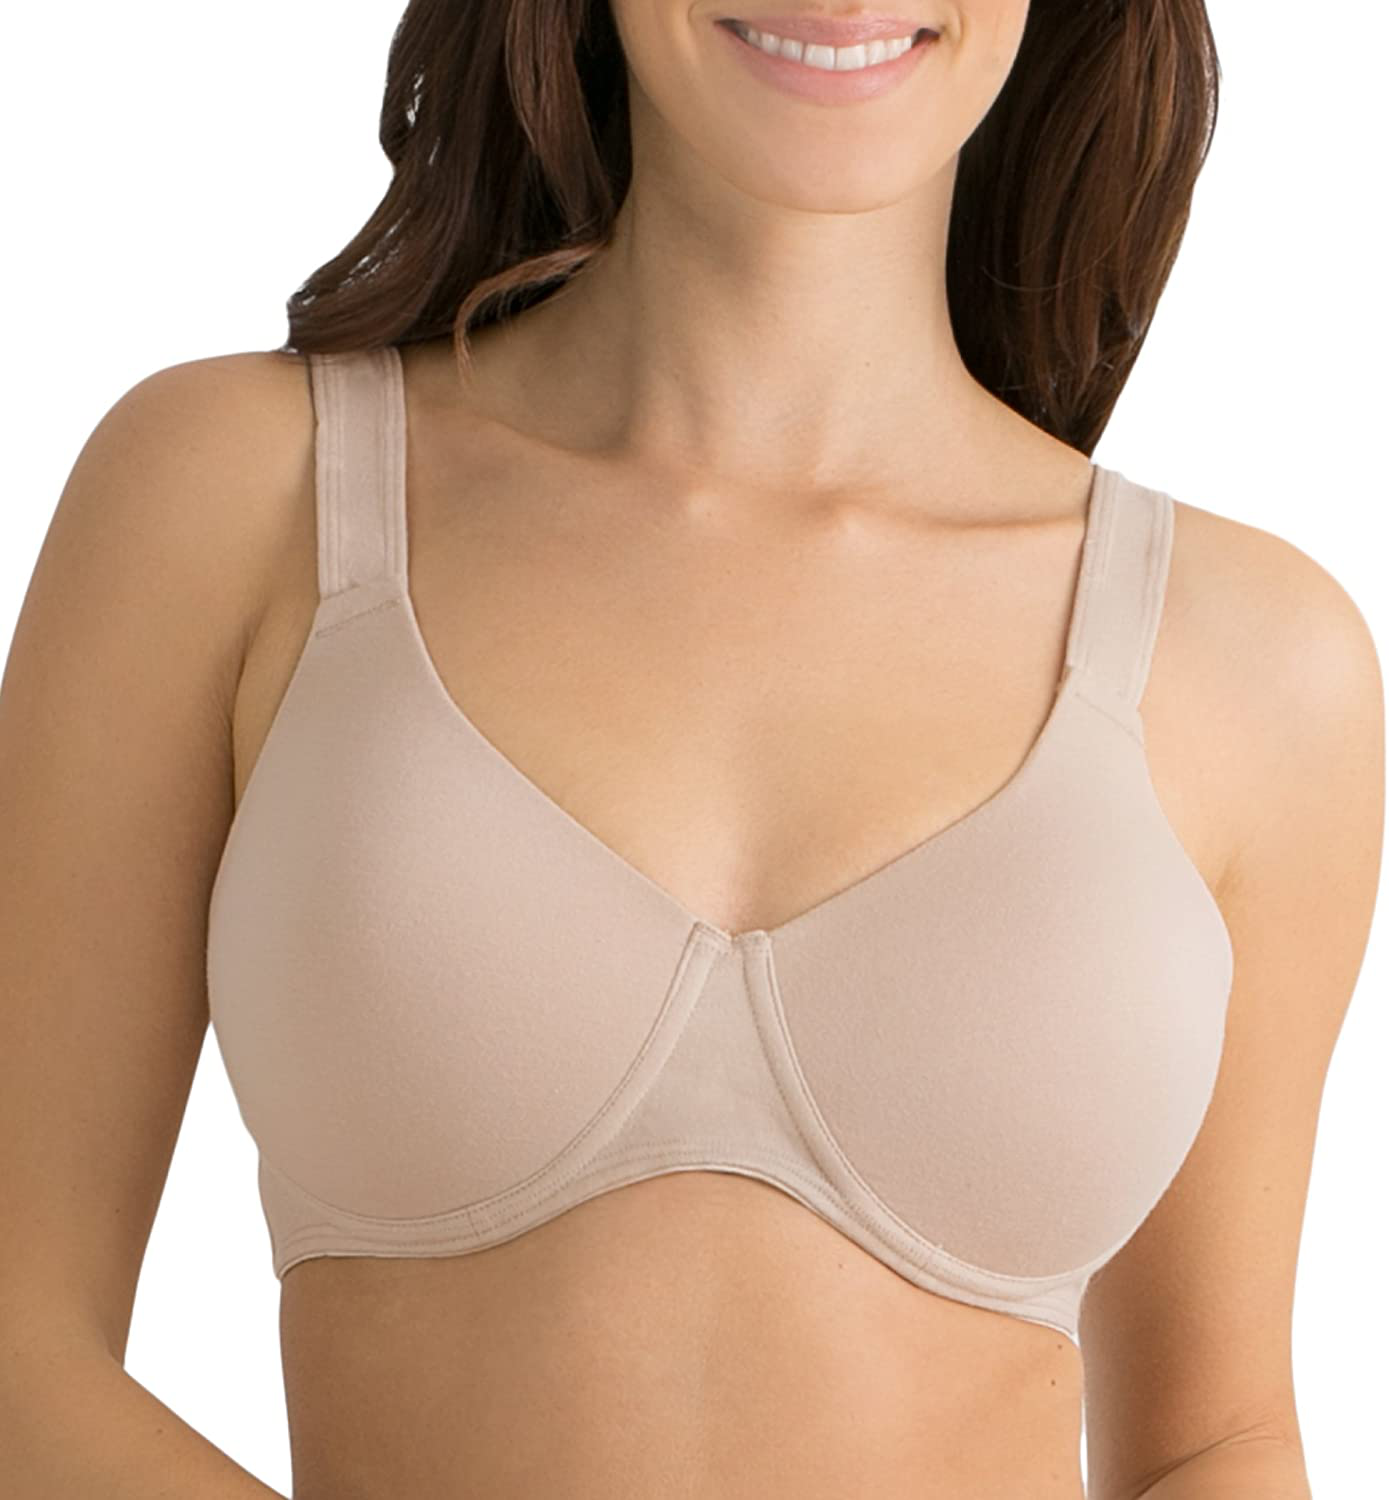 Fruit Of The Loom Women's Seamed Soft Cup Wirefree Cotton Bra 2